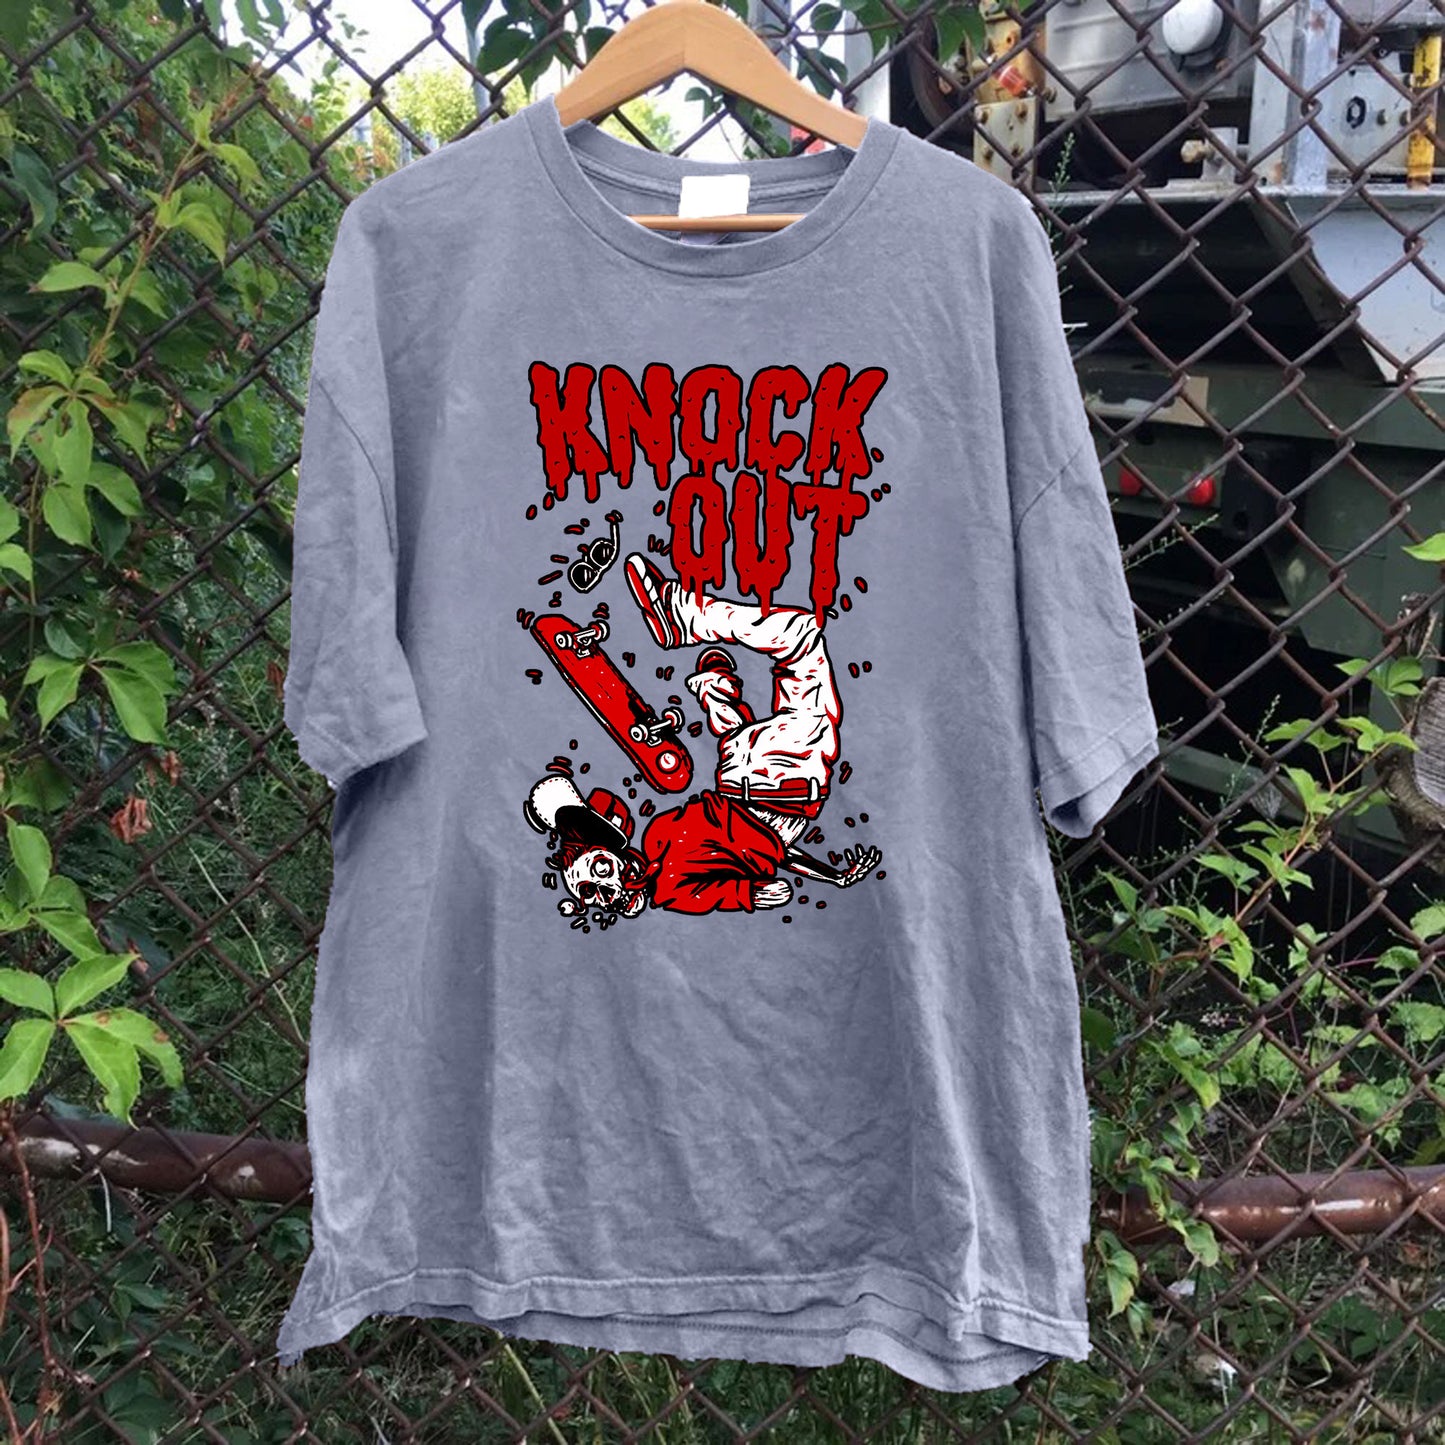 Knock Out Skateboarder Tee